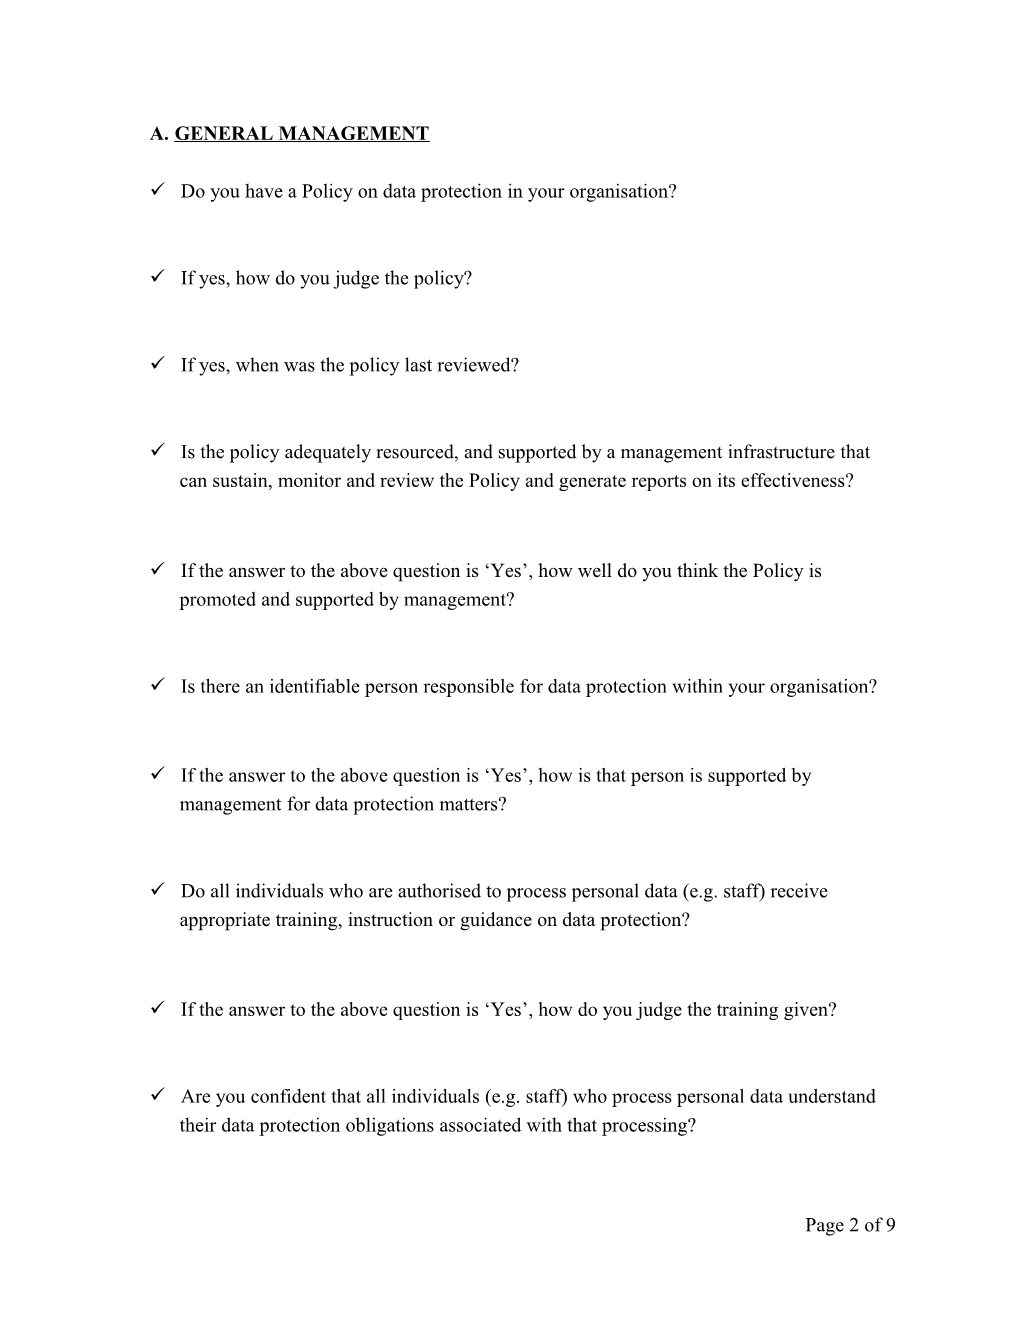 Self-Assessment Questionnaire: Compliance with Dataprotection Obligations When Processing